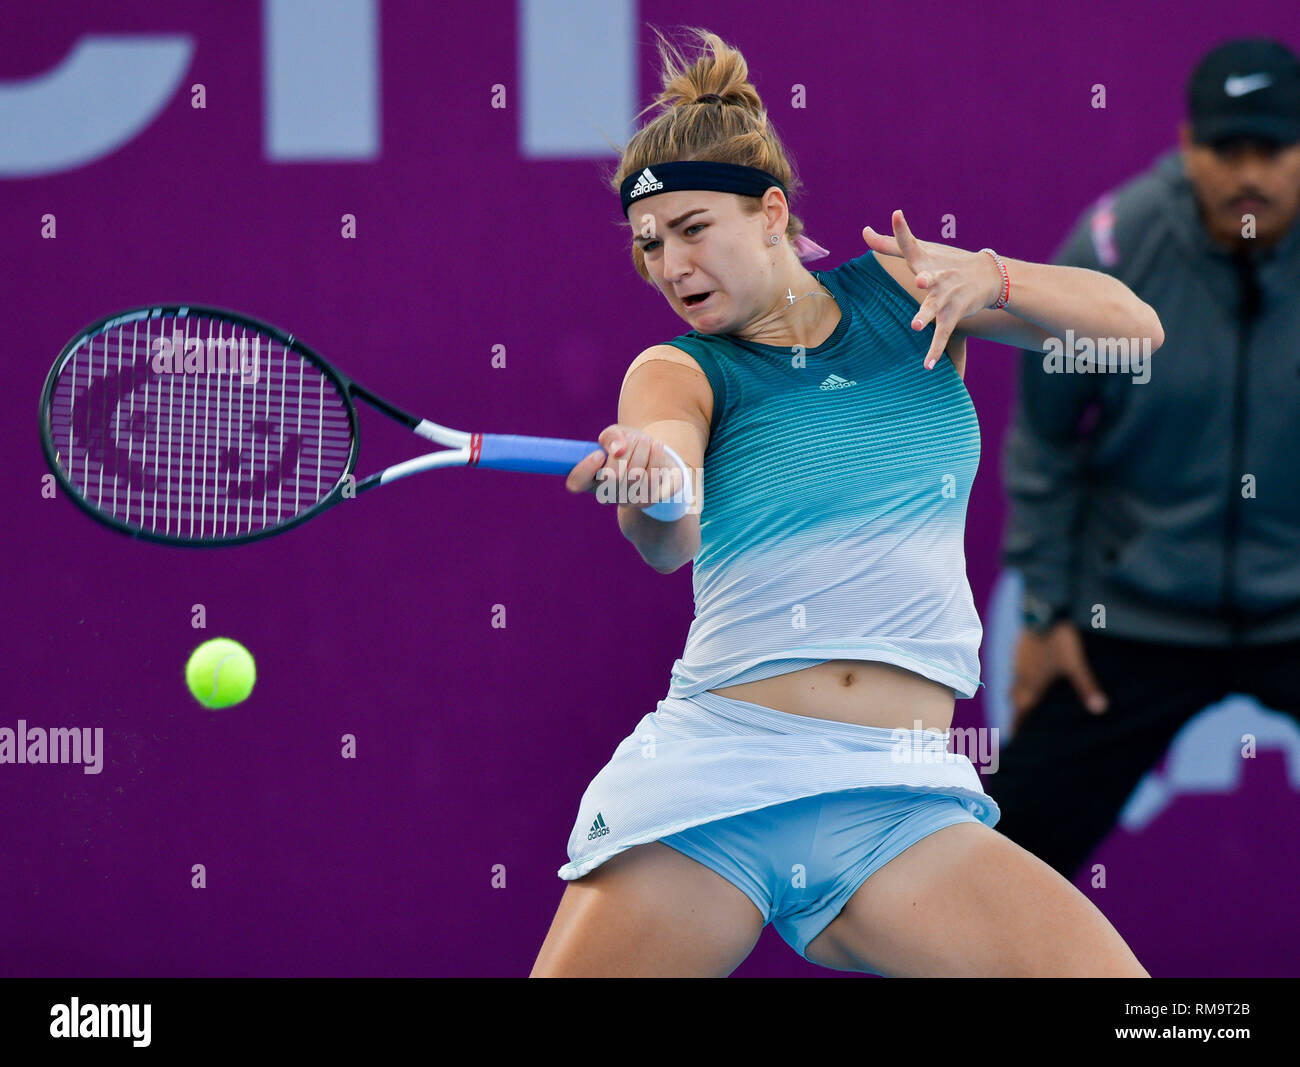 Doha, Qatar. 13th Feb, 2019. Karolina of the Czech Republic hits a during the singles second round match between Karolina Muchova of the Czech Republic and Hsieh Su-wei of